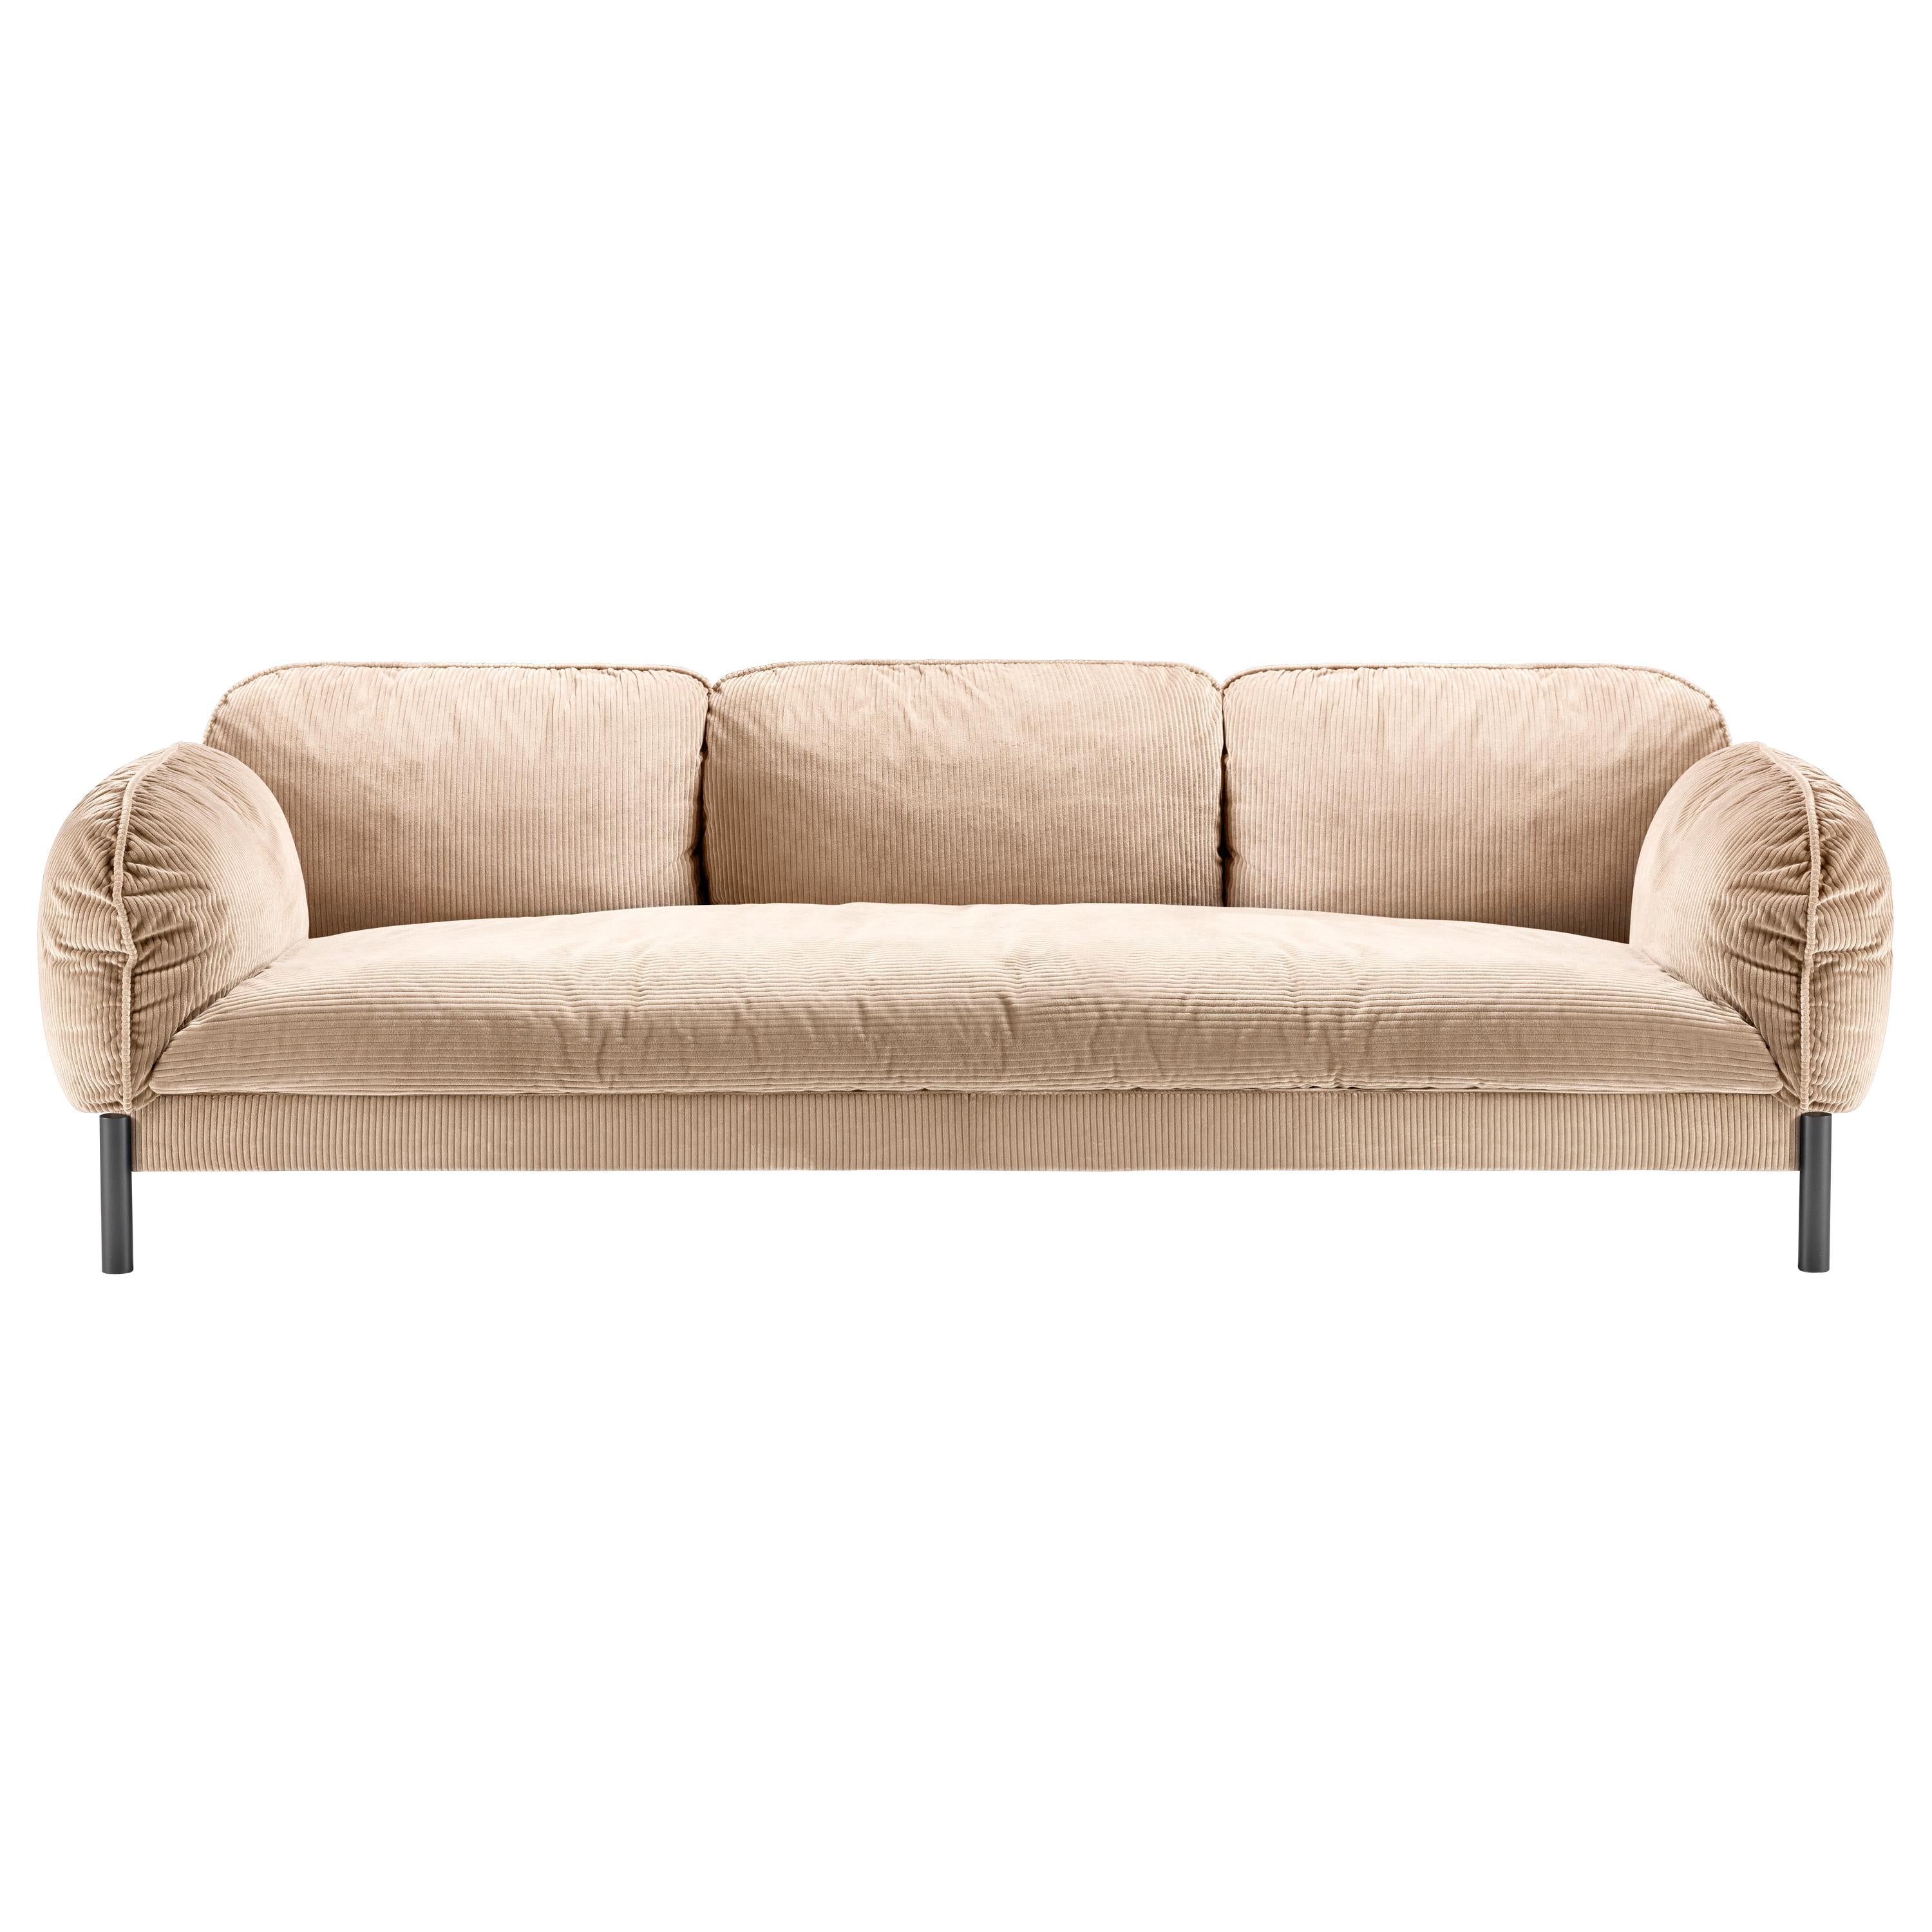 Tarantino 3 Seaters Sofa in Beige Fabric with Black Gold Legs For Sale